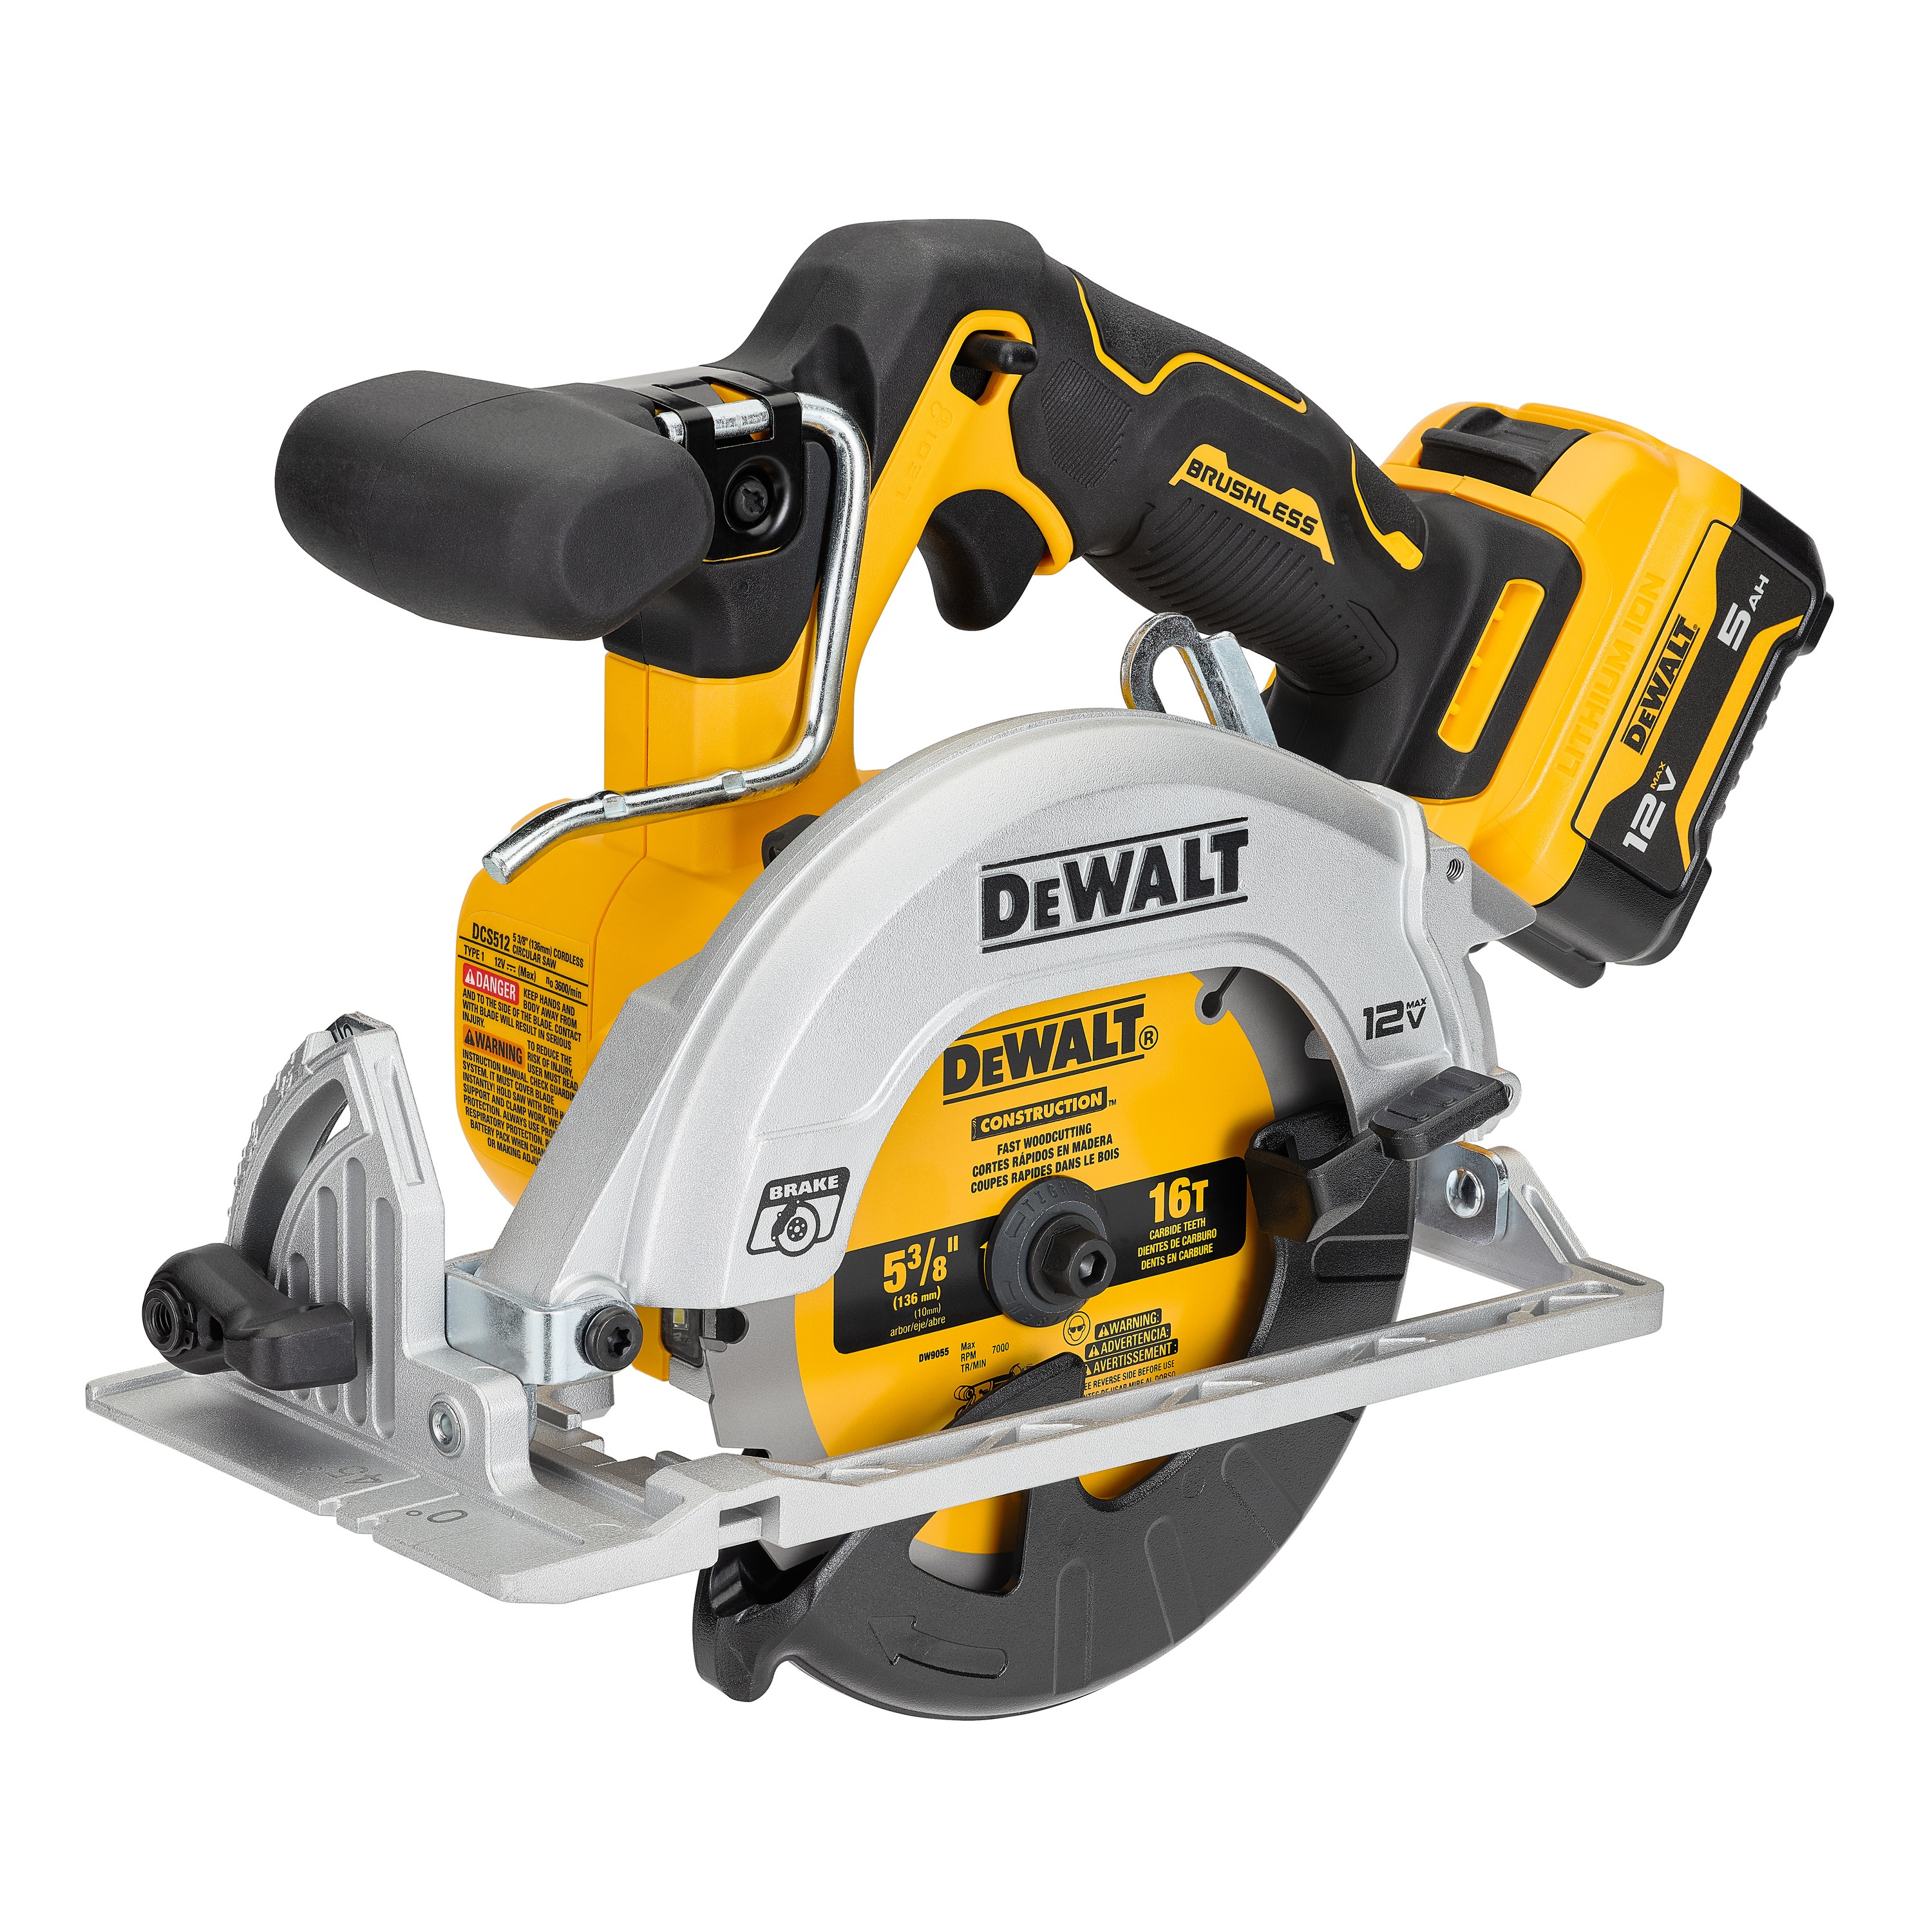 Profile of xtreme 12 volt 5 and three eighths inch brushless cordless circular saw kit.